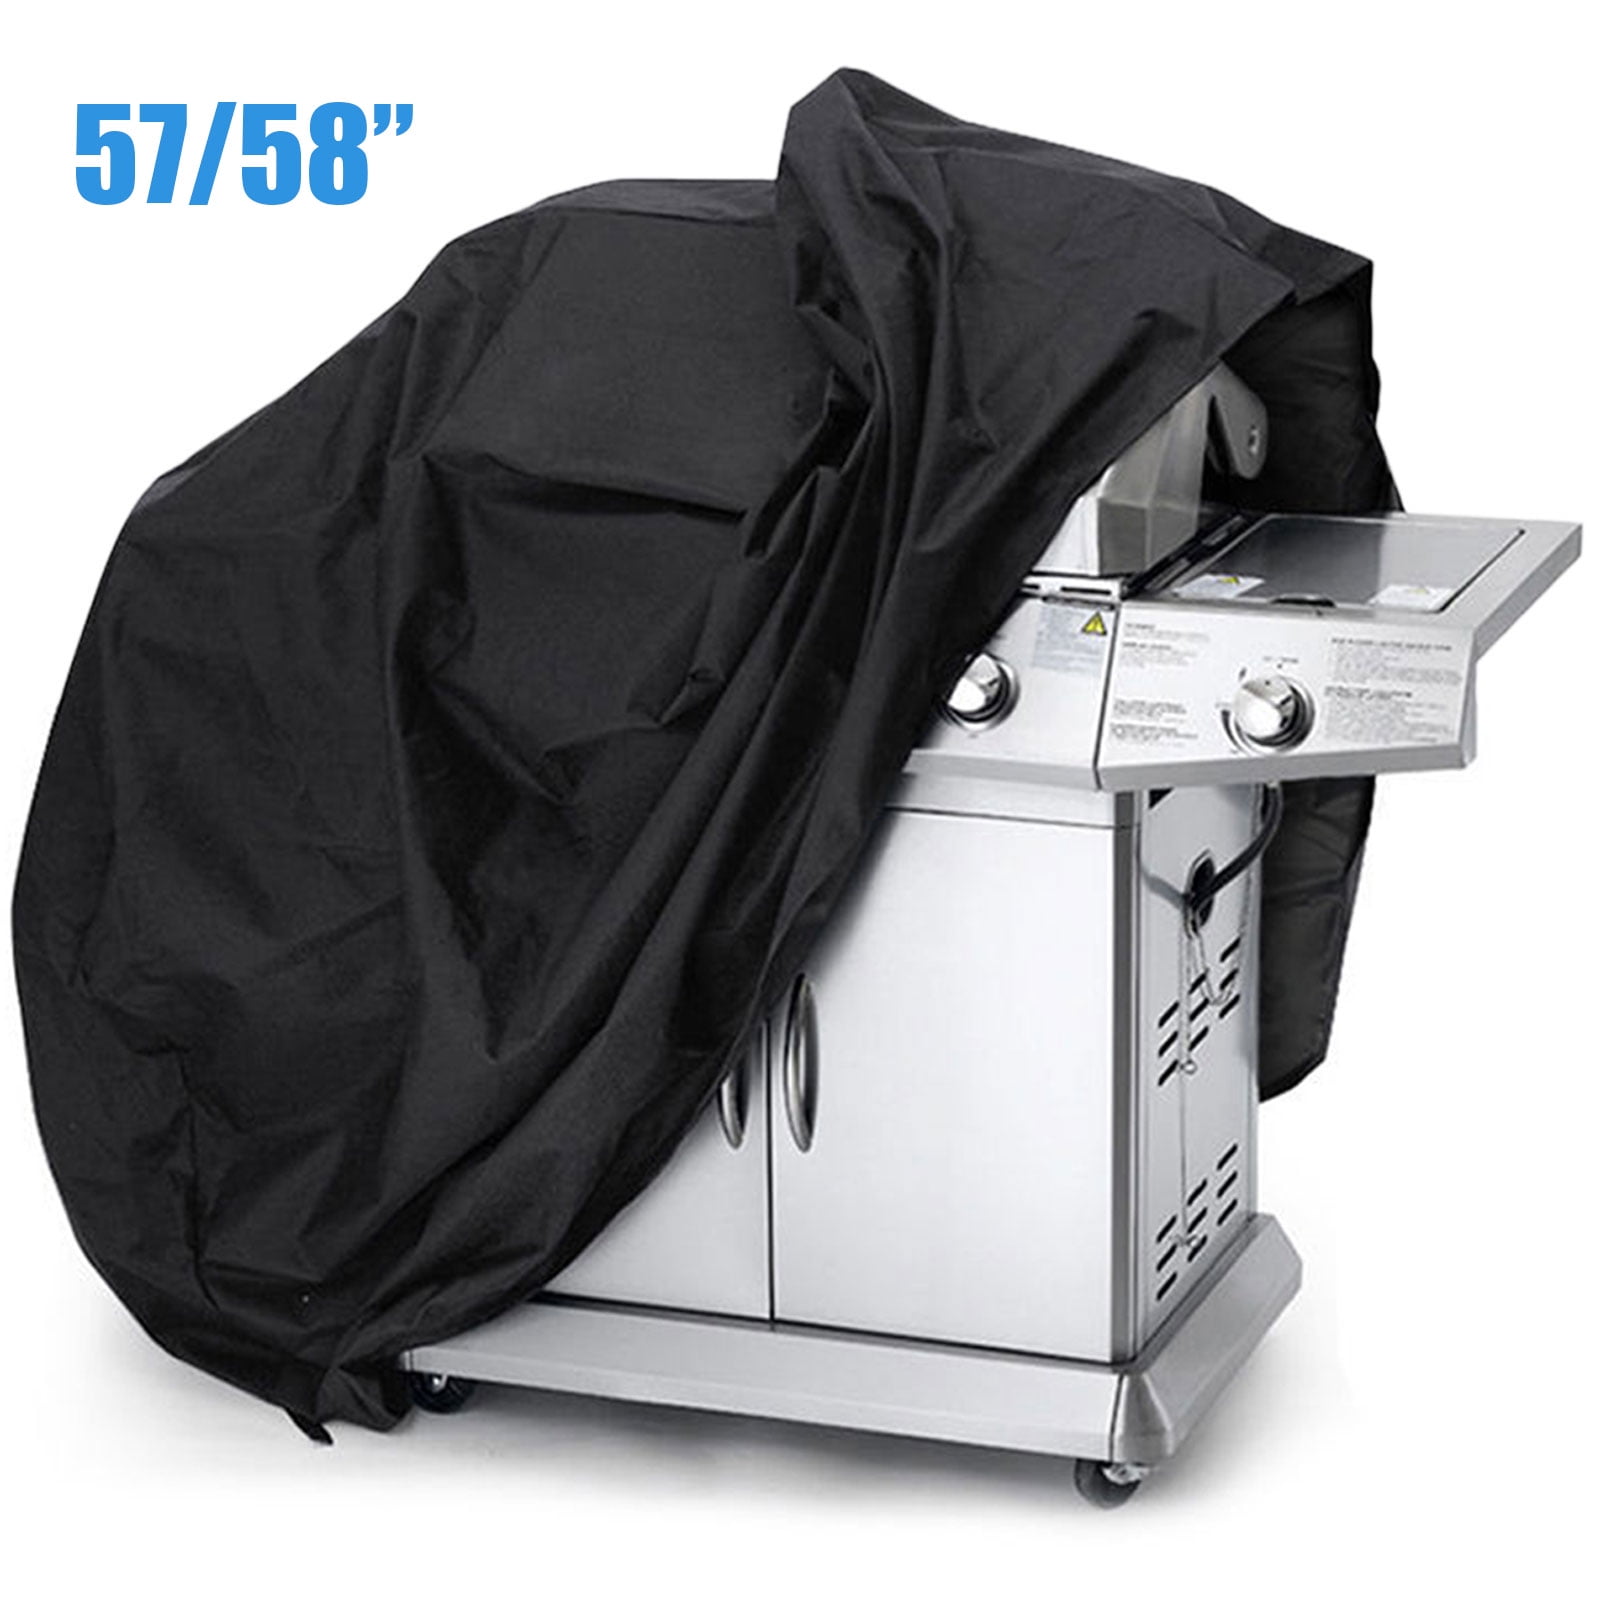 EXTRA LARGE BBQ COVER OUTDOOR WATERPROOF GARDEN BARBECUE GRILL GAS PROTECTOR UK 